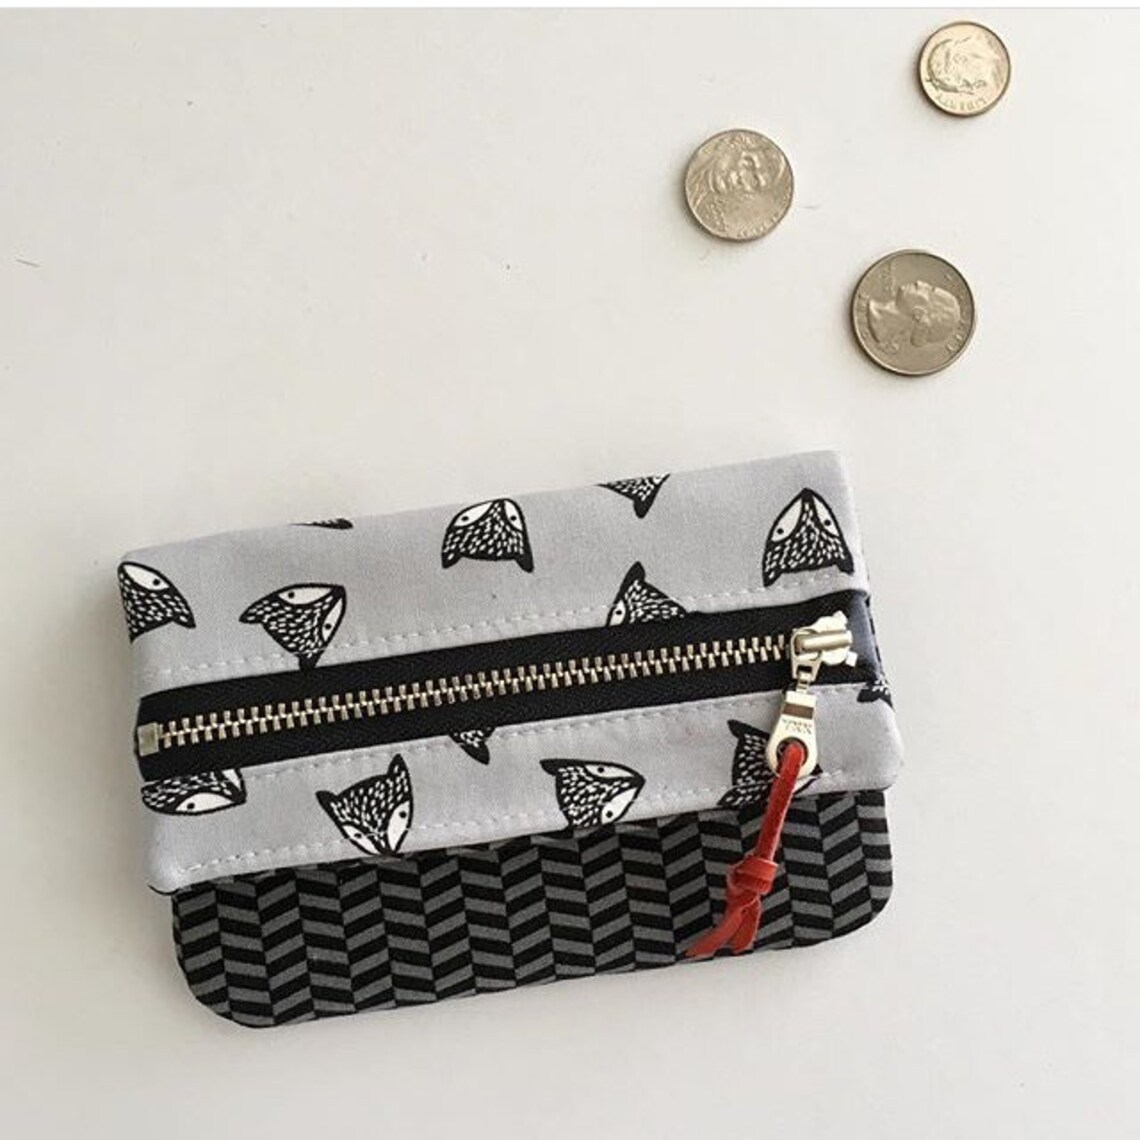 Foldover Zipper Pouch PDF Sewing Pattern Instant Download - Etsy